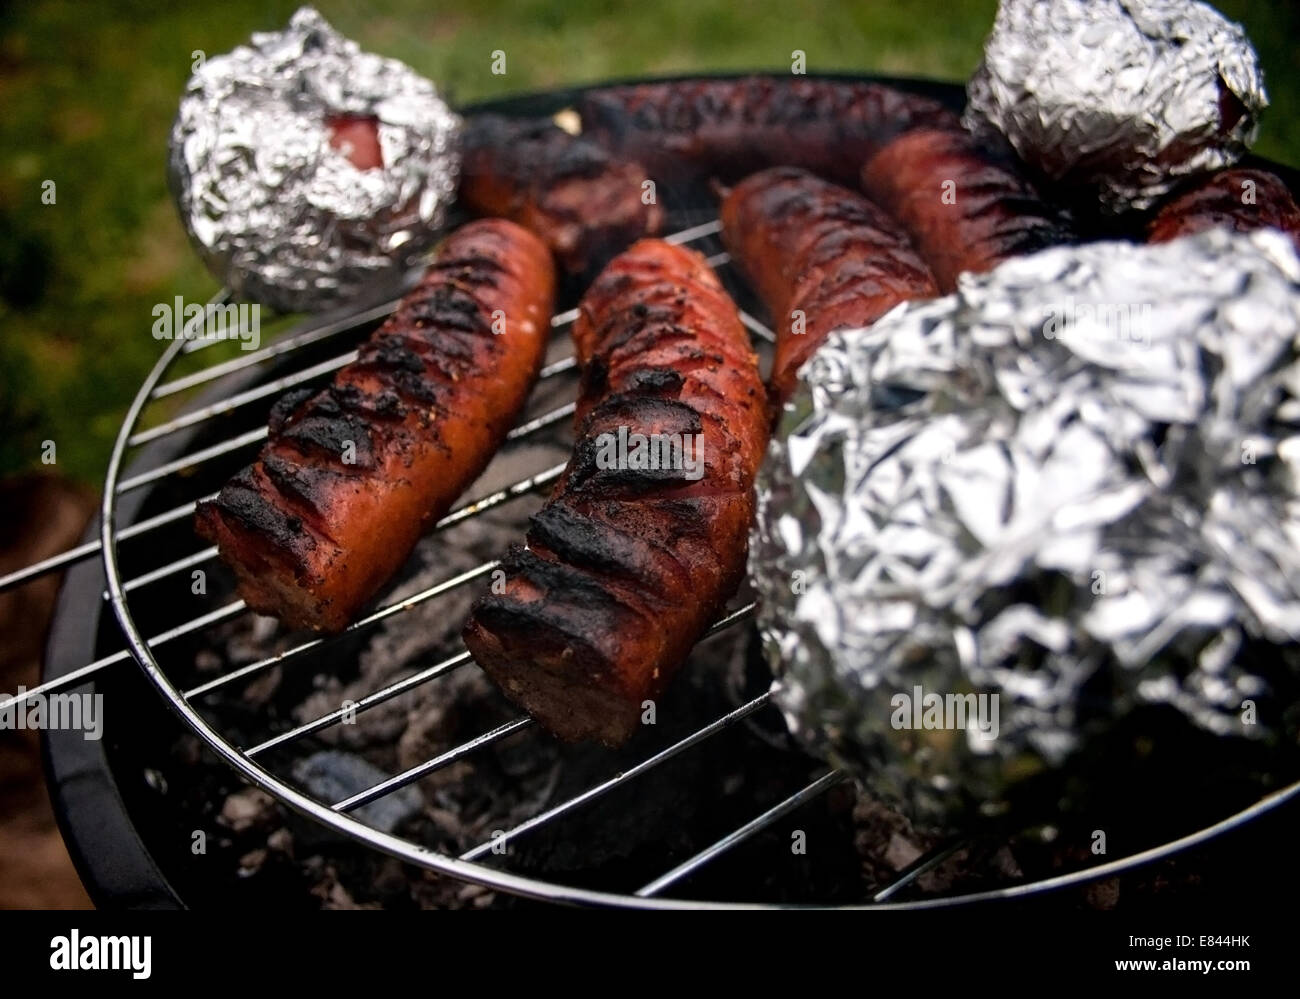 barbecue, grill, cooking outdoors Stock Photo